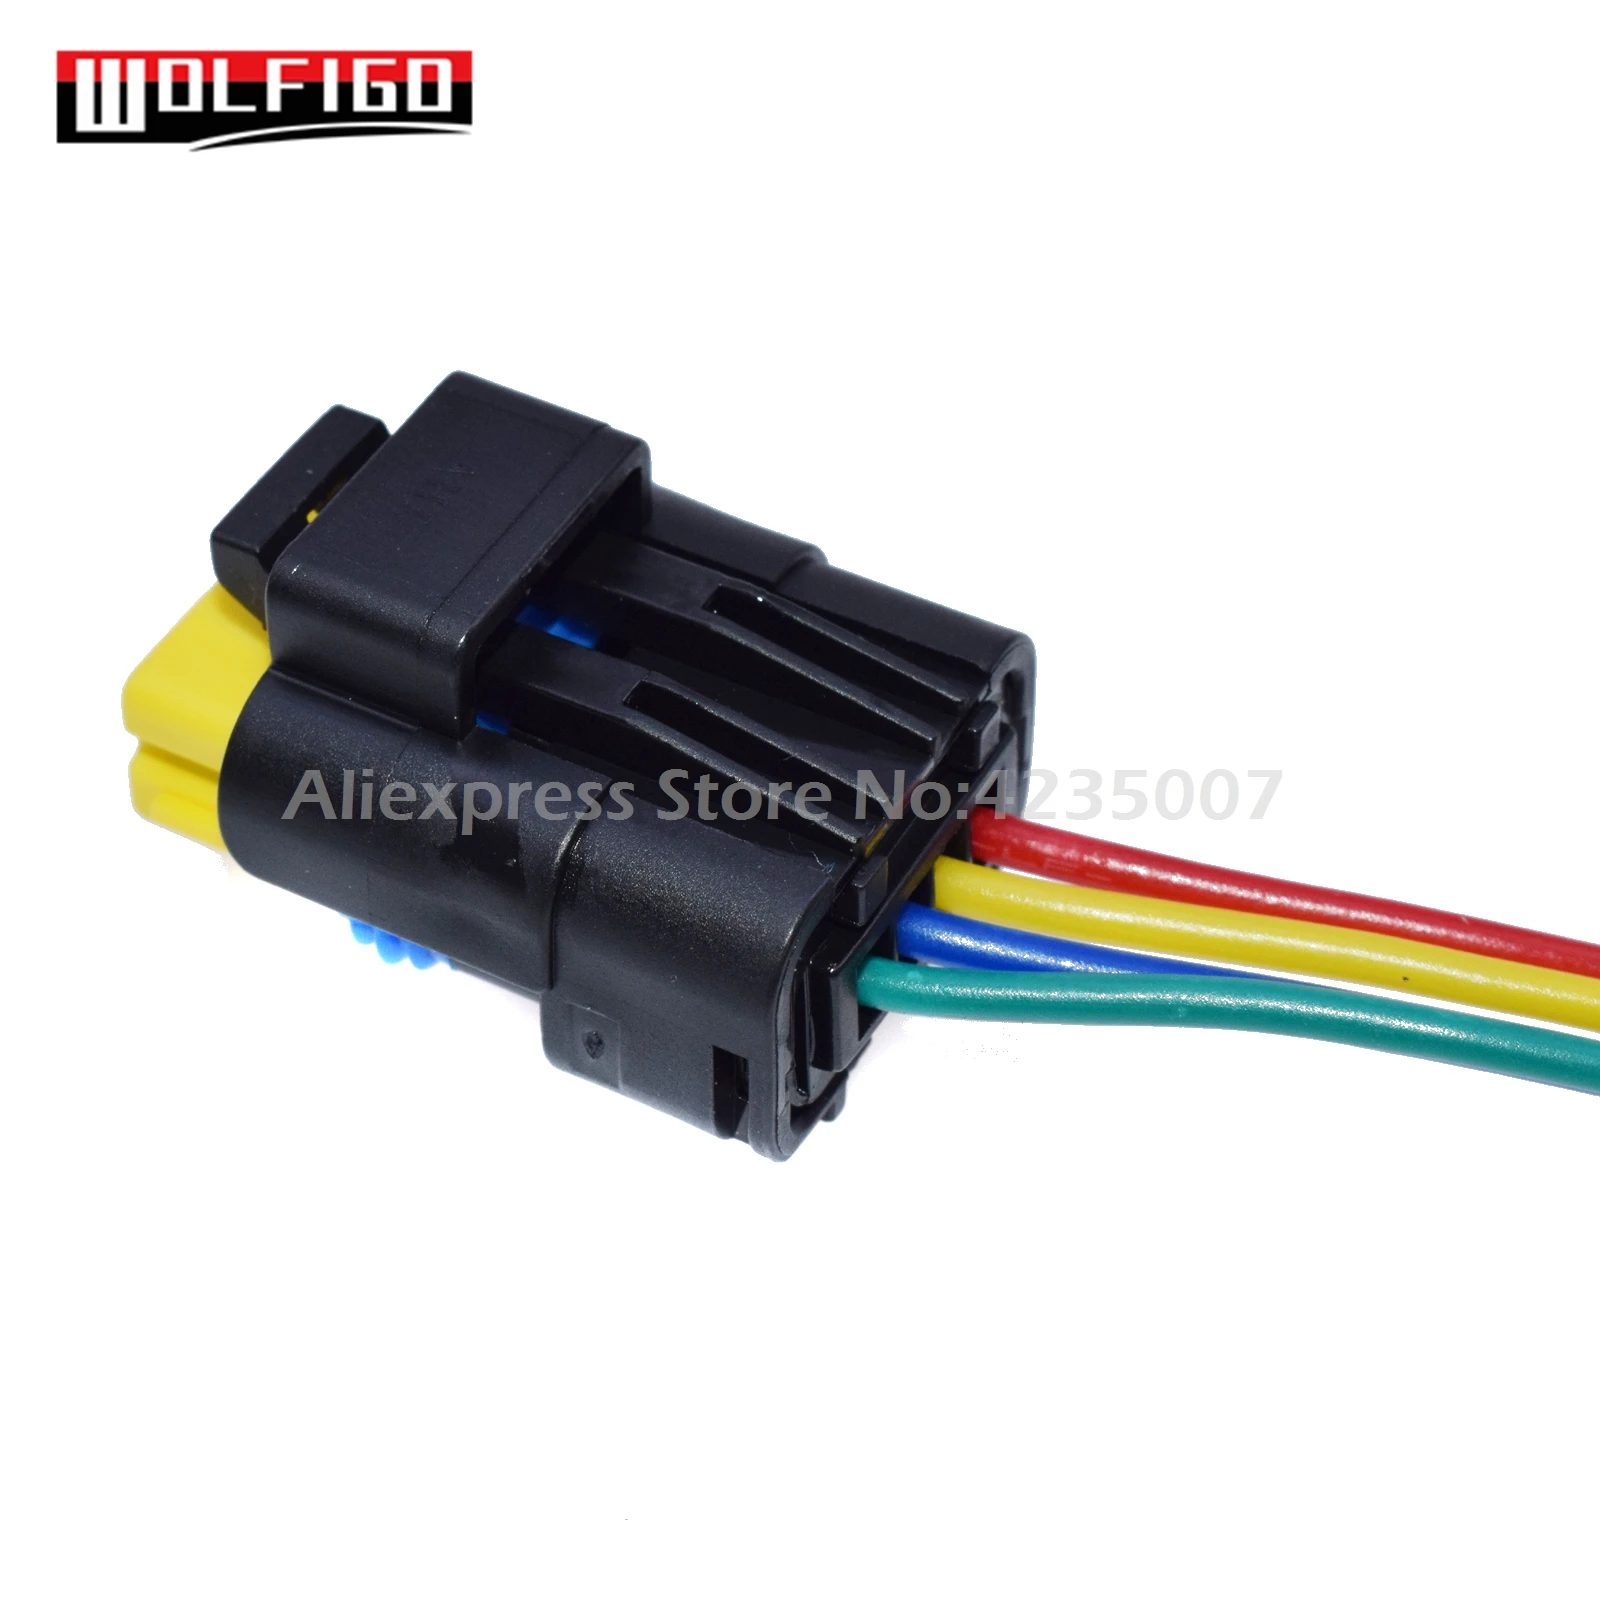 WOLFIGO New Fuel Pump Cable Wire Wiring Harness Plug 4 Pin For Renault MASTER III OPEL 8201348602,172025557R,241105468R